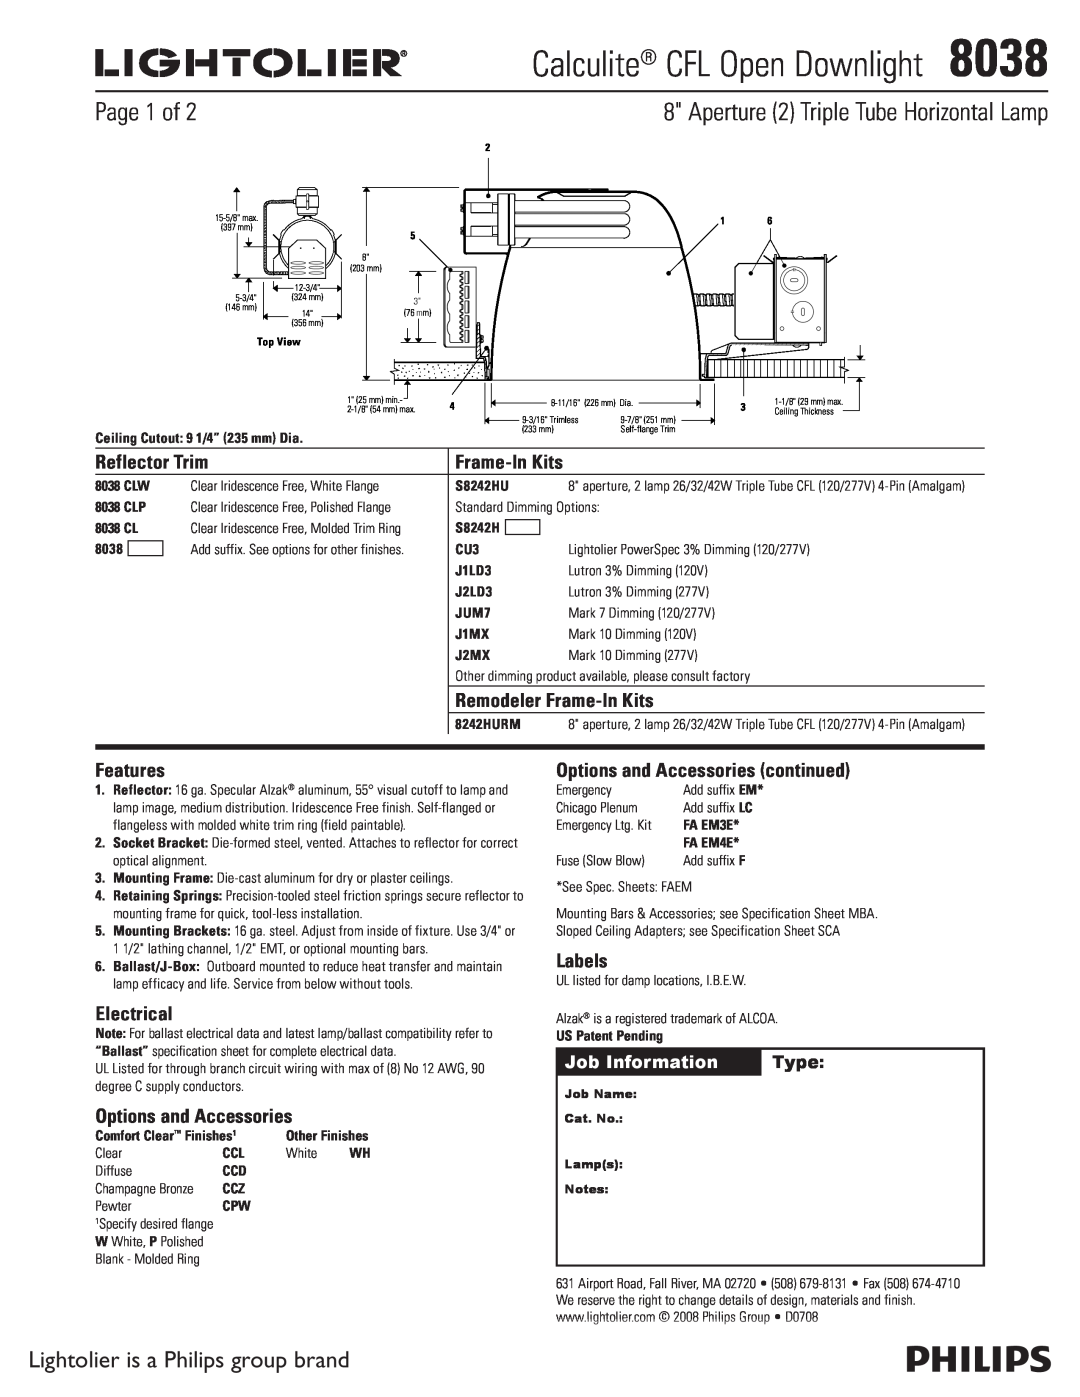 Lightolier specifications Calculite CFL Open Downlight8038, Page 1 of, Aperture 2 Triple Tube Horizontal Lamp, Features 